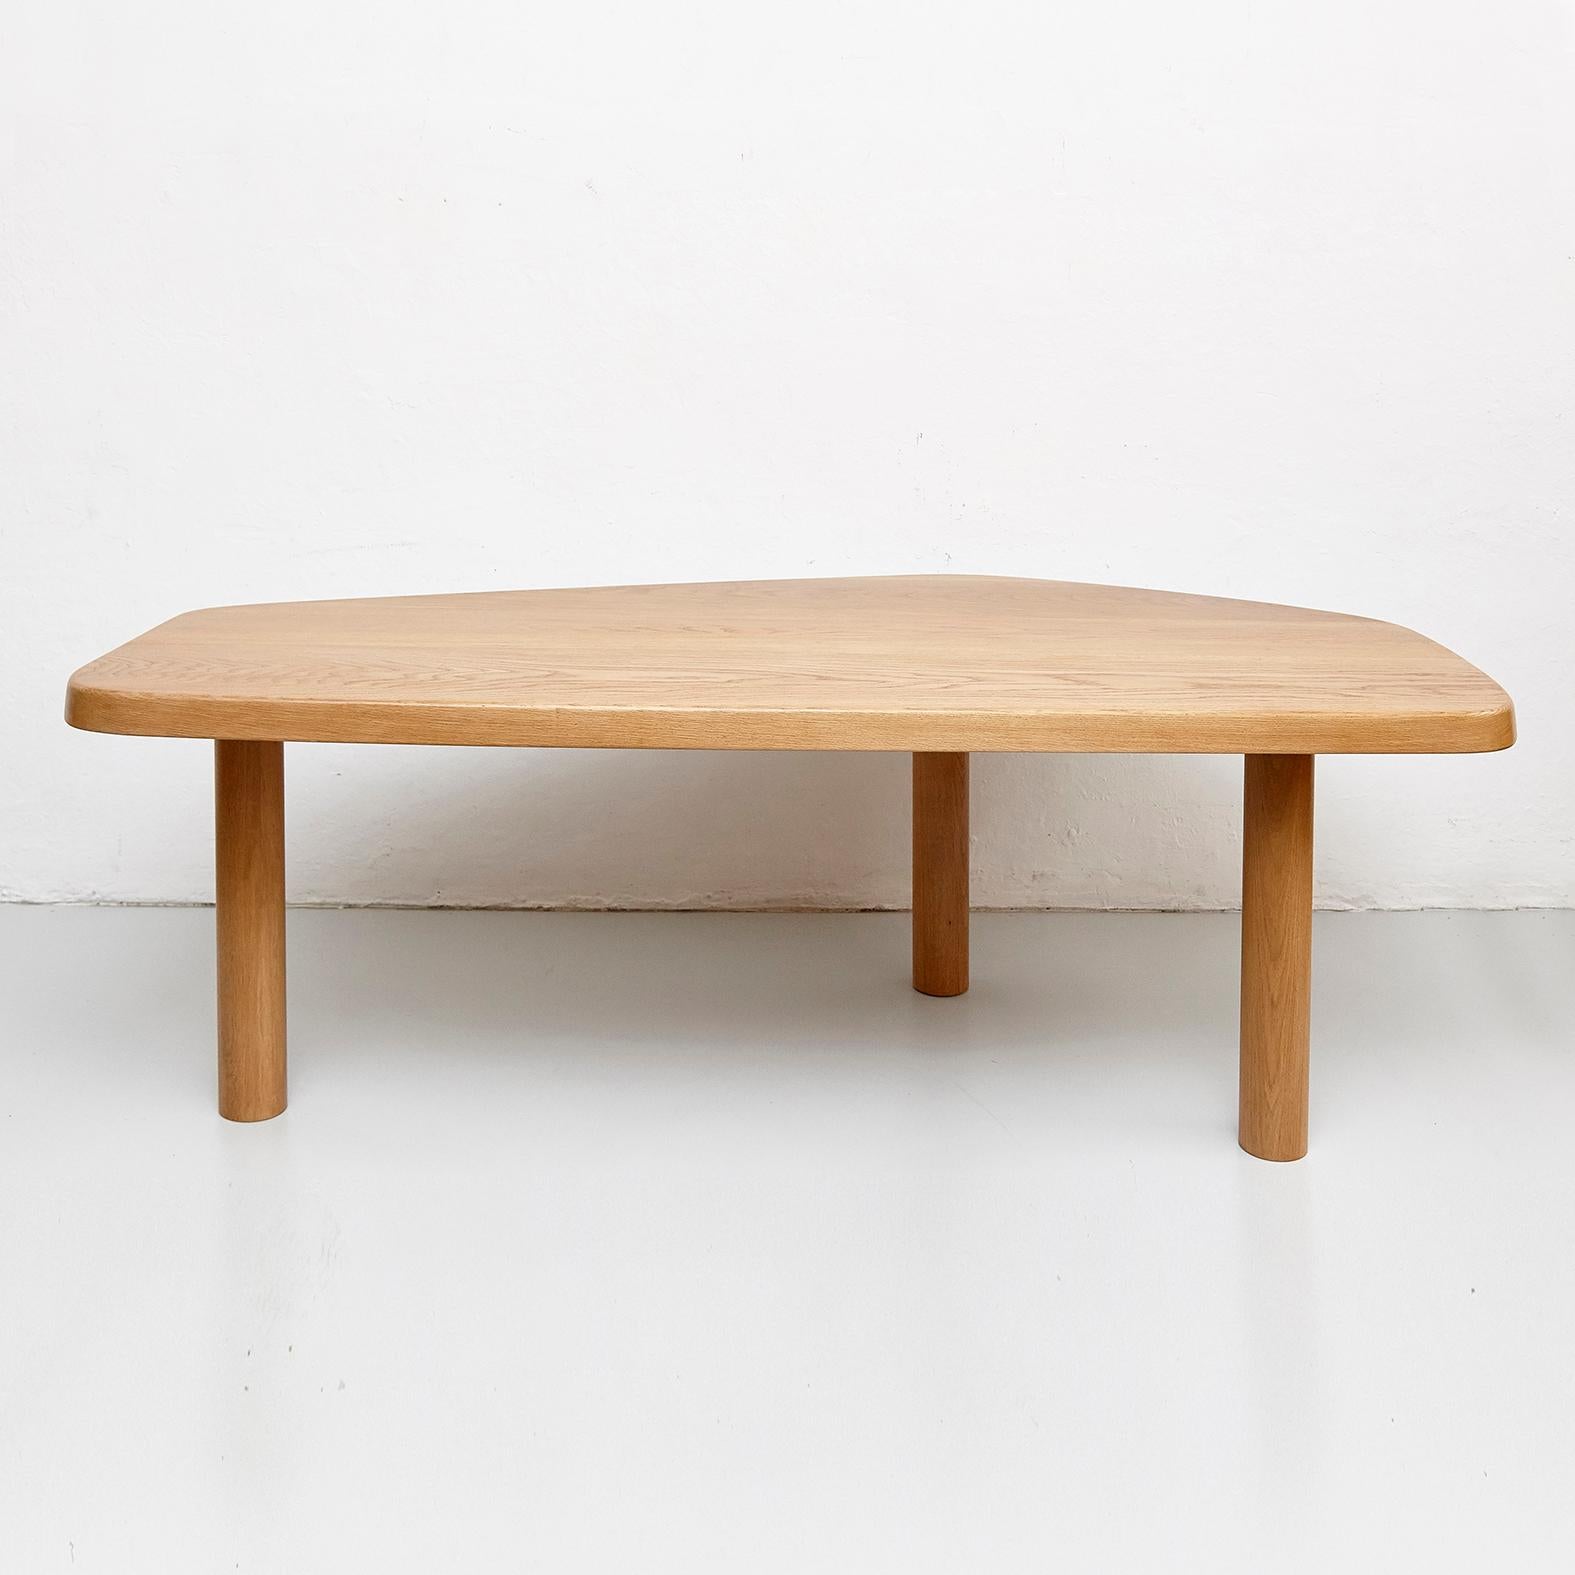 Spanish Dada Est. Contemporary, Oak Free-Form Dining Large Table